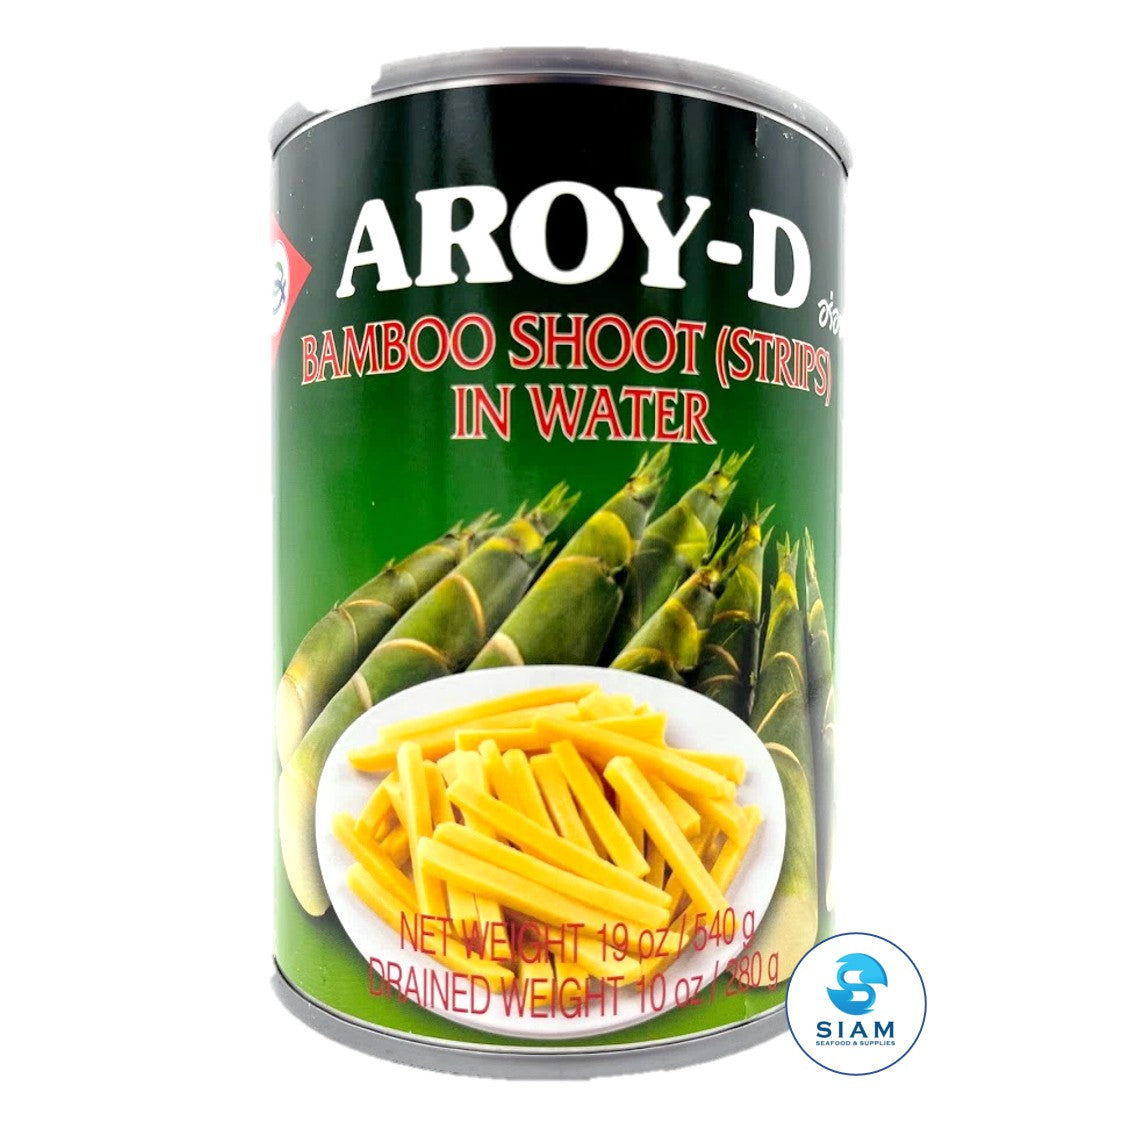 Bamboo Shoot (Strips) In Water - Aroy-D (19 Oz-Net Wt 22.7 Oz) หน่อไม้ ...